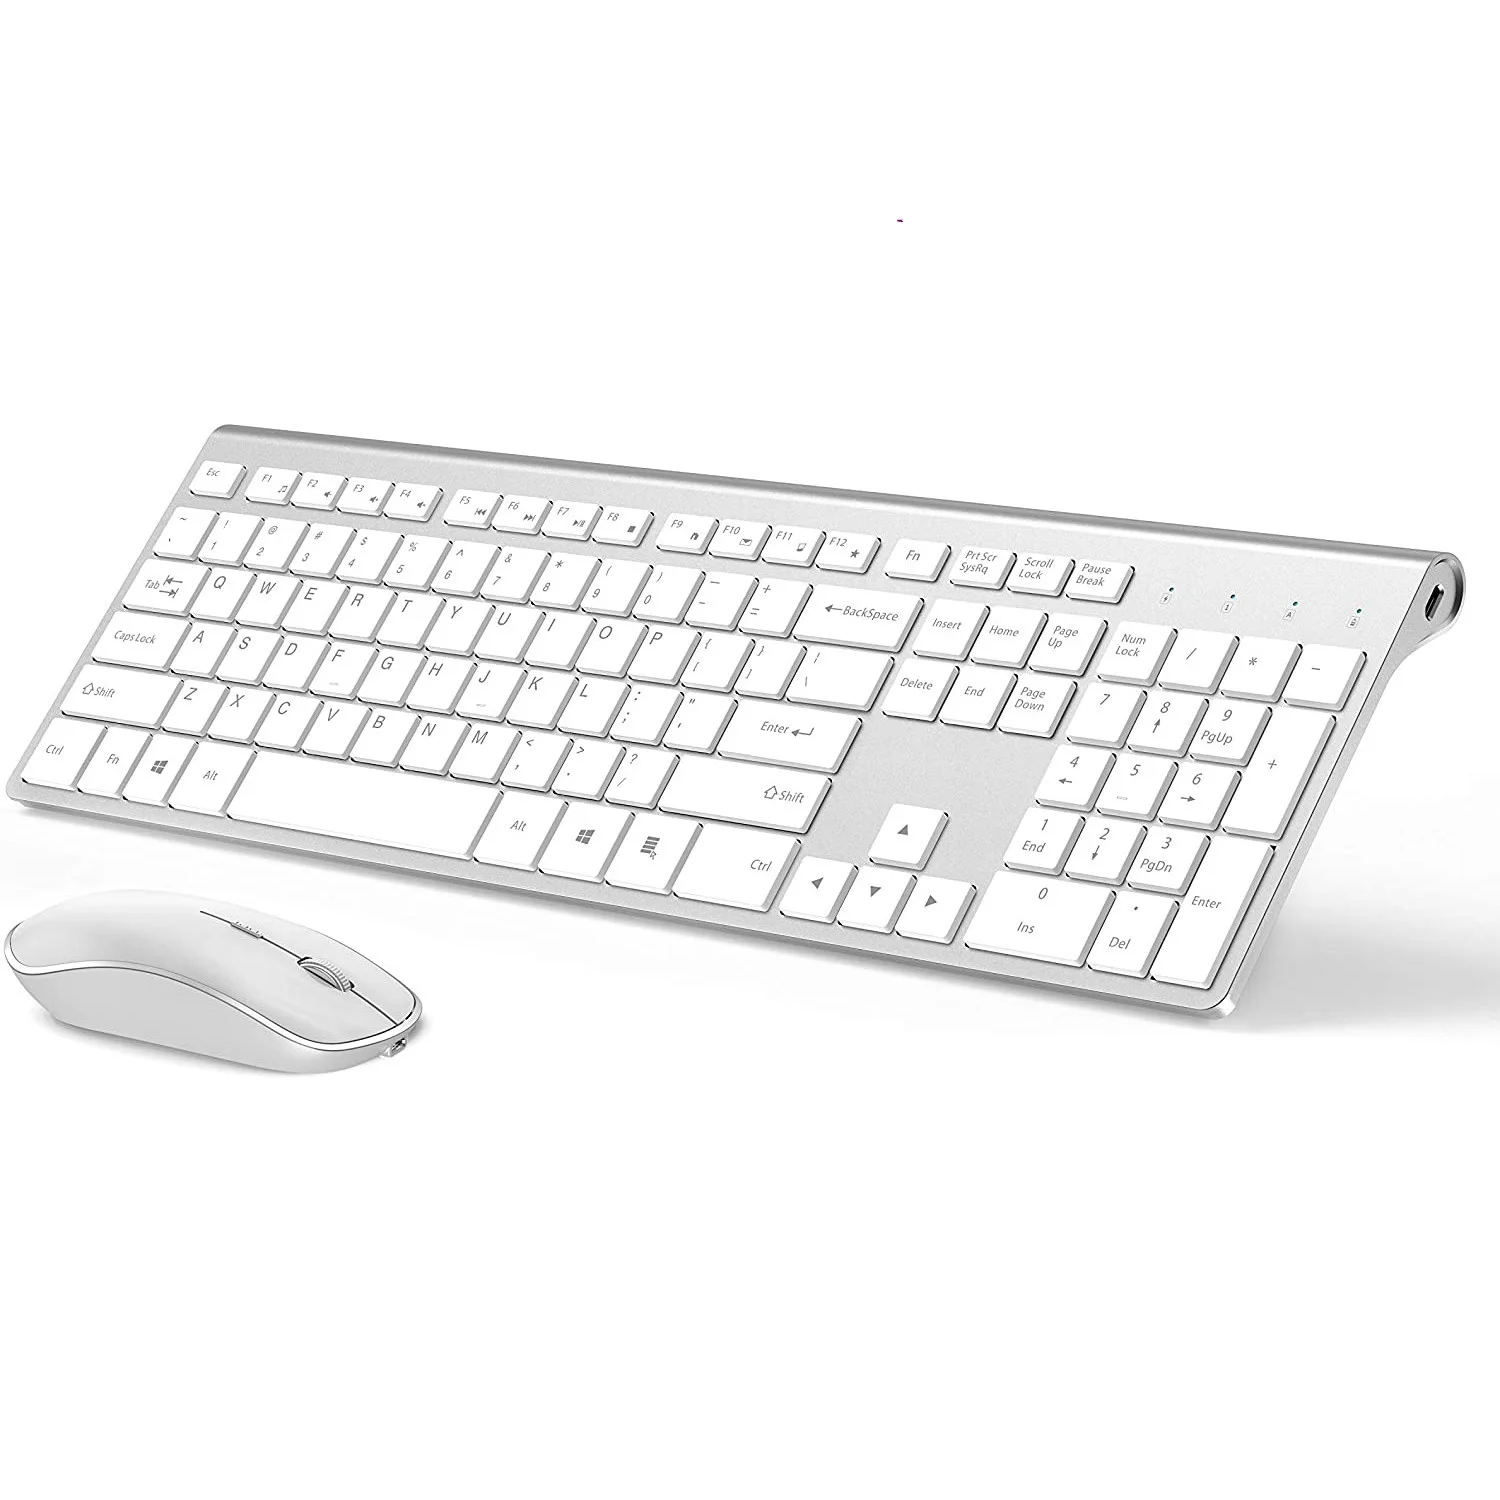 2.4G Rechargeable Wireless Keyboard And Mouse Ergonomic Full-Size Design Russian/English/German/French Laptop/PC/ Windows，Silver enlarge